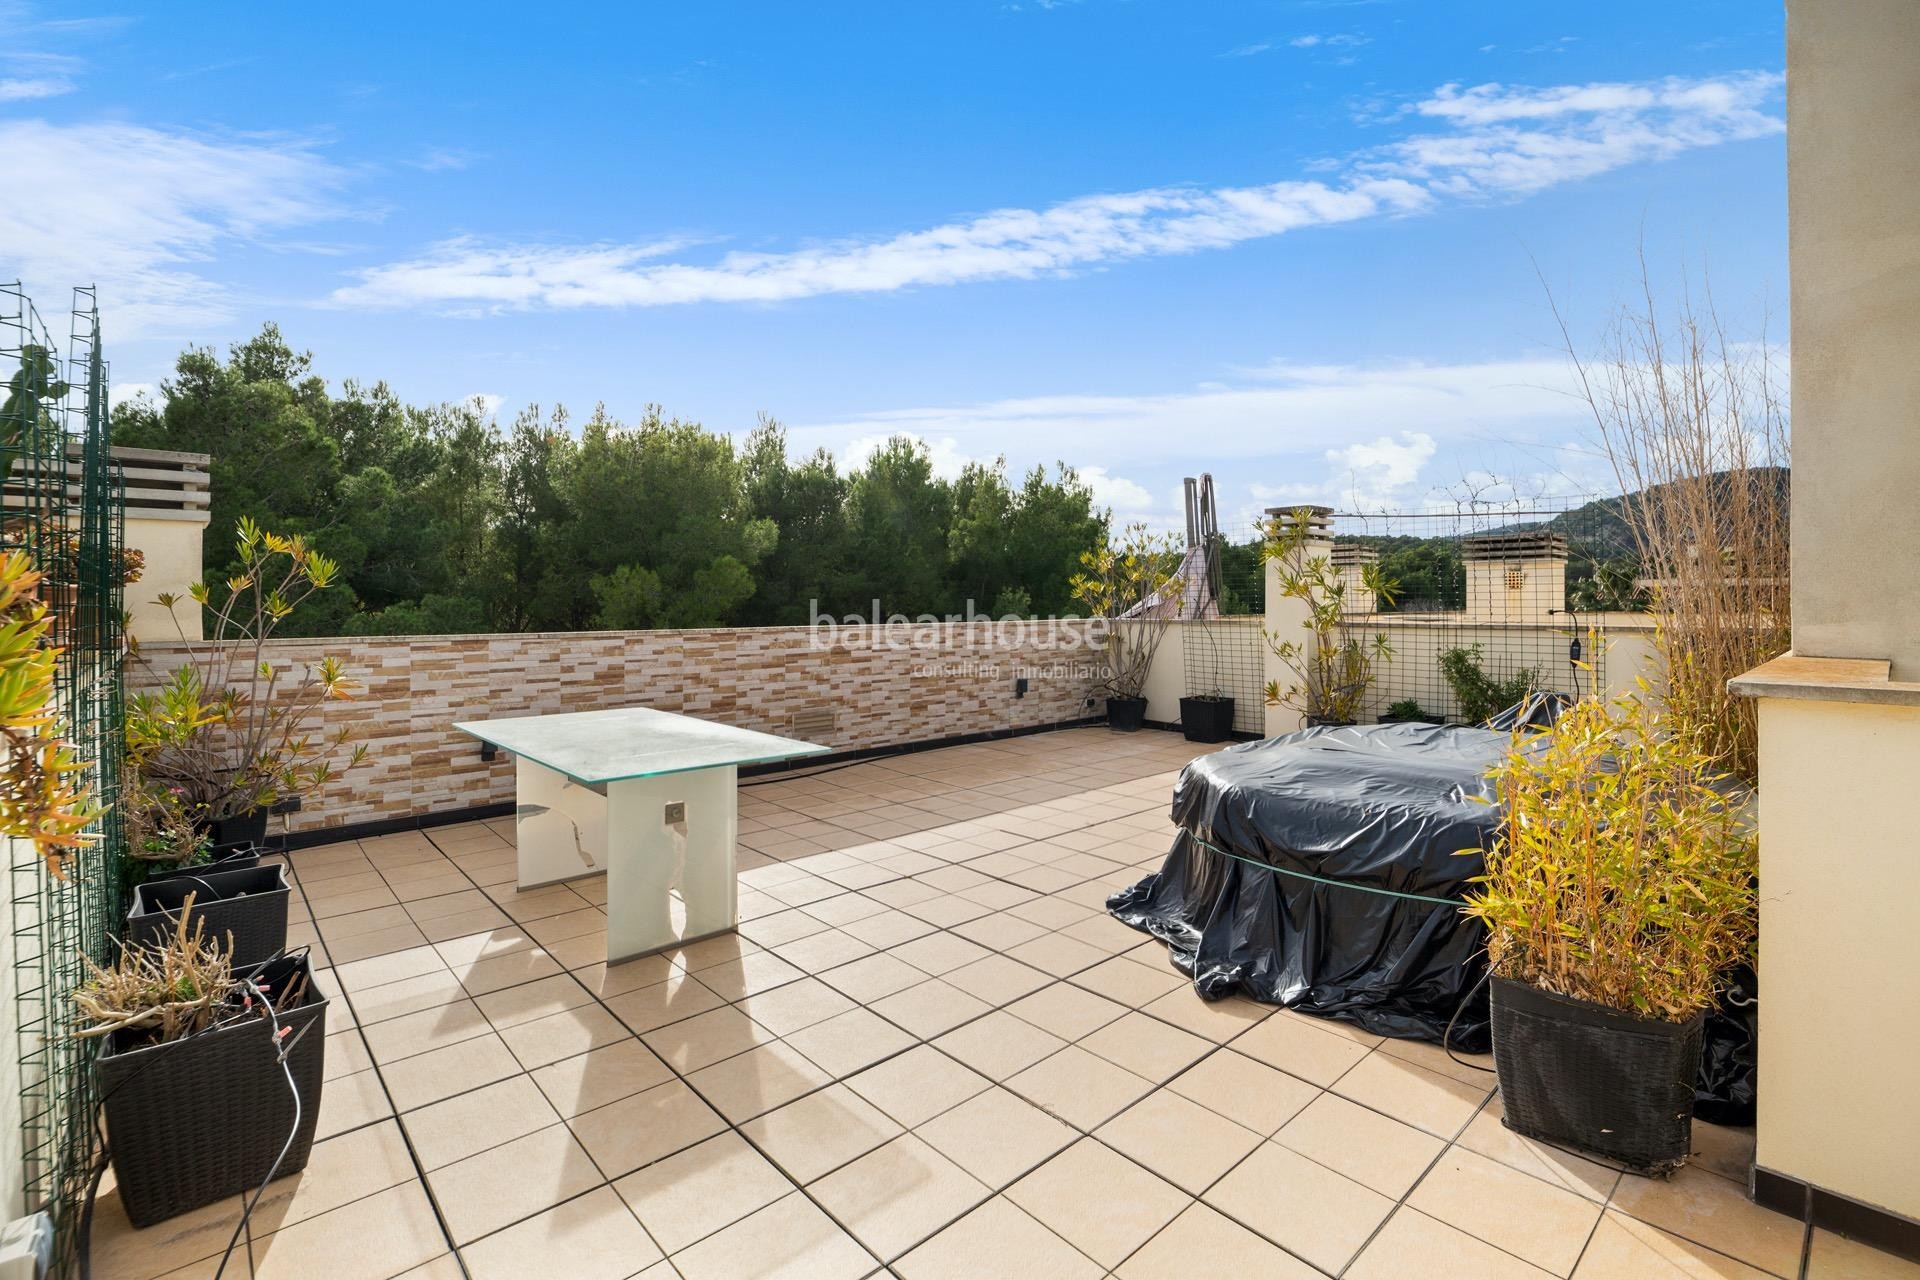 Fantastic penthouse with terrace and views of the green landscape of the Bellver Castle.